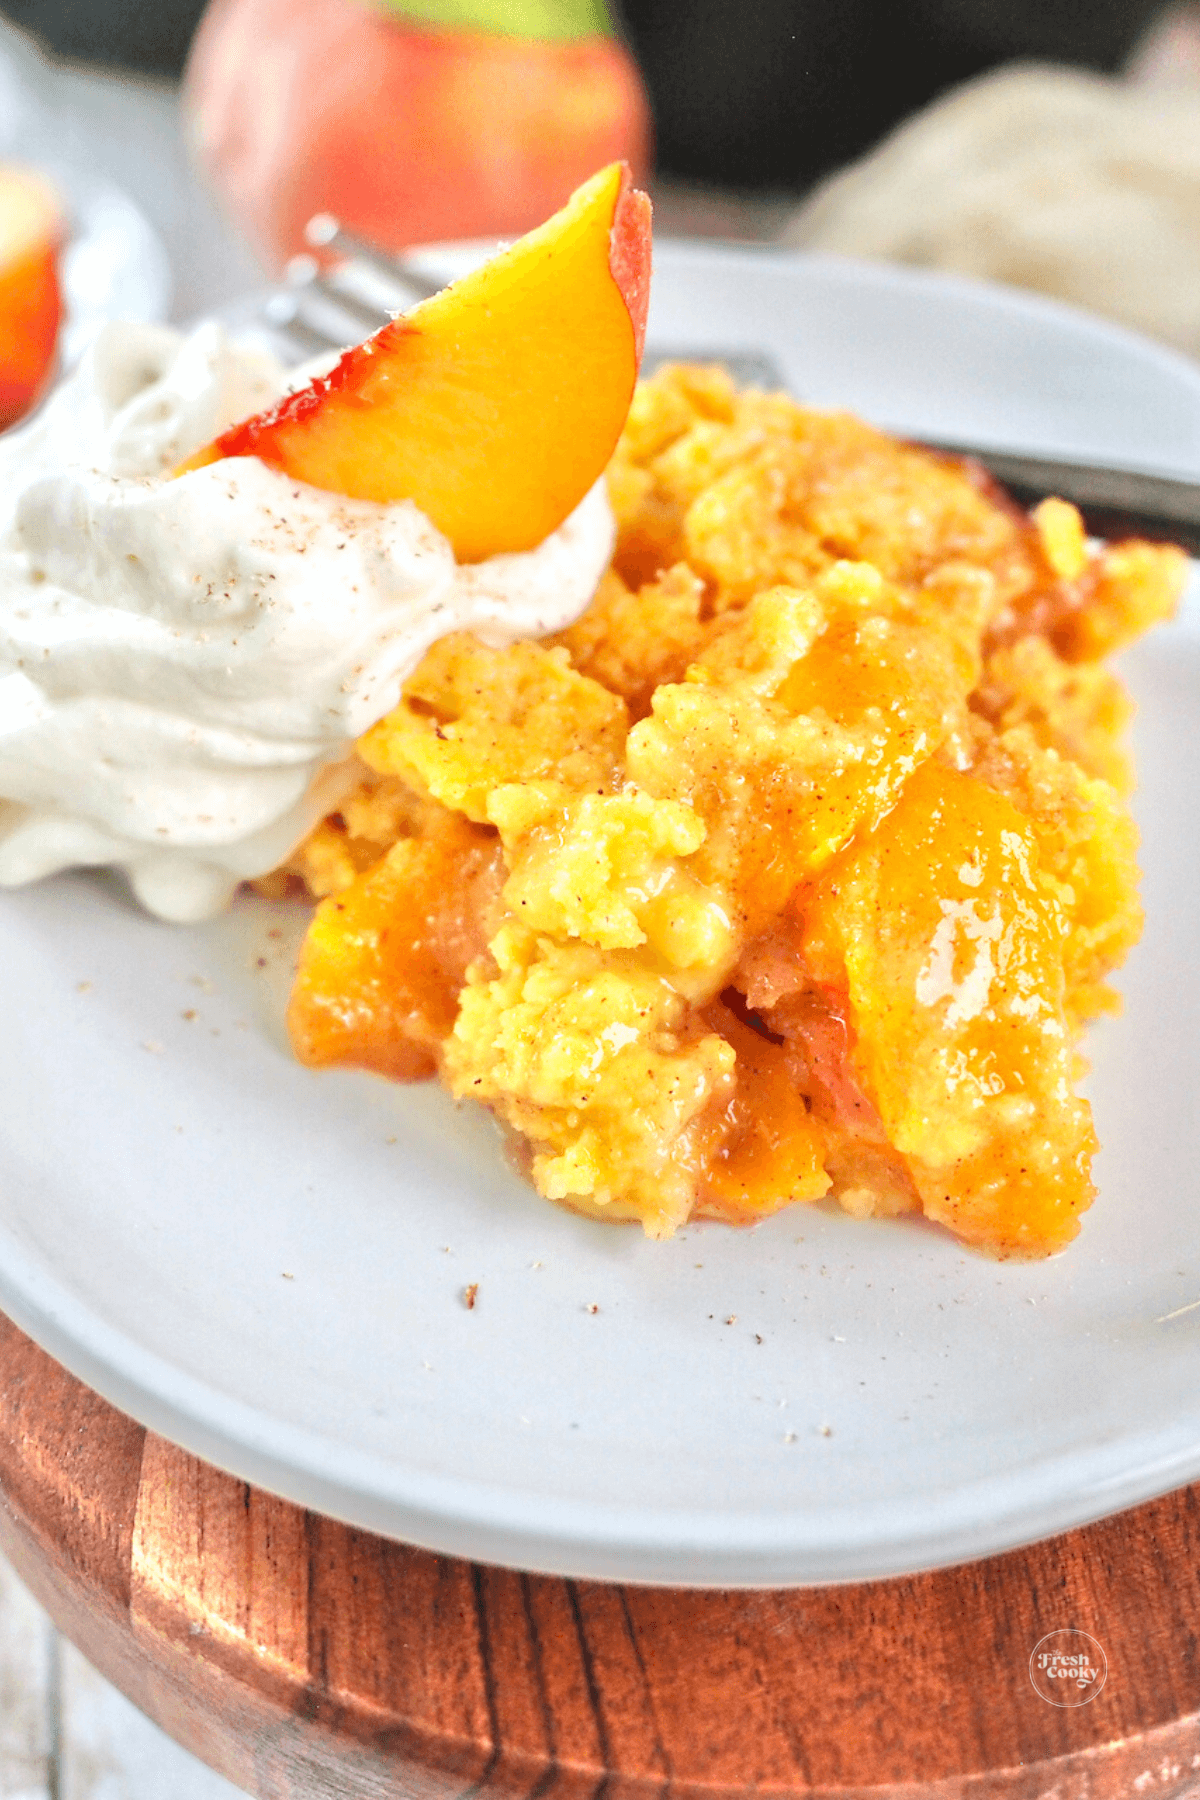 Peach cobbler served with whipped cream and slice of fresh peach.